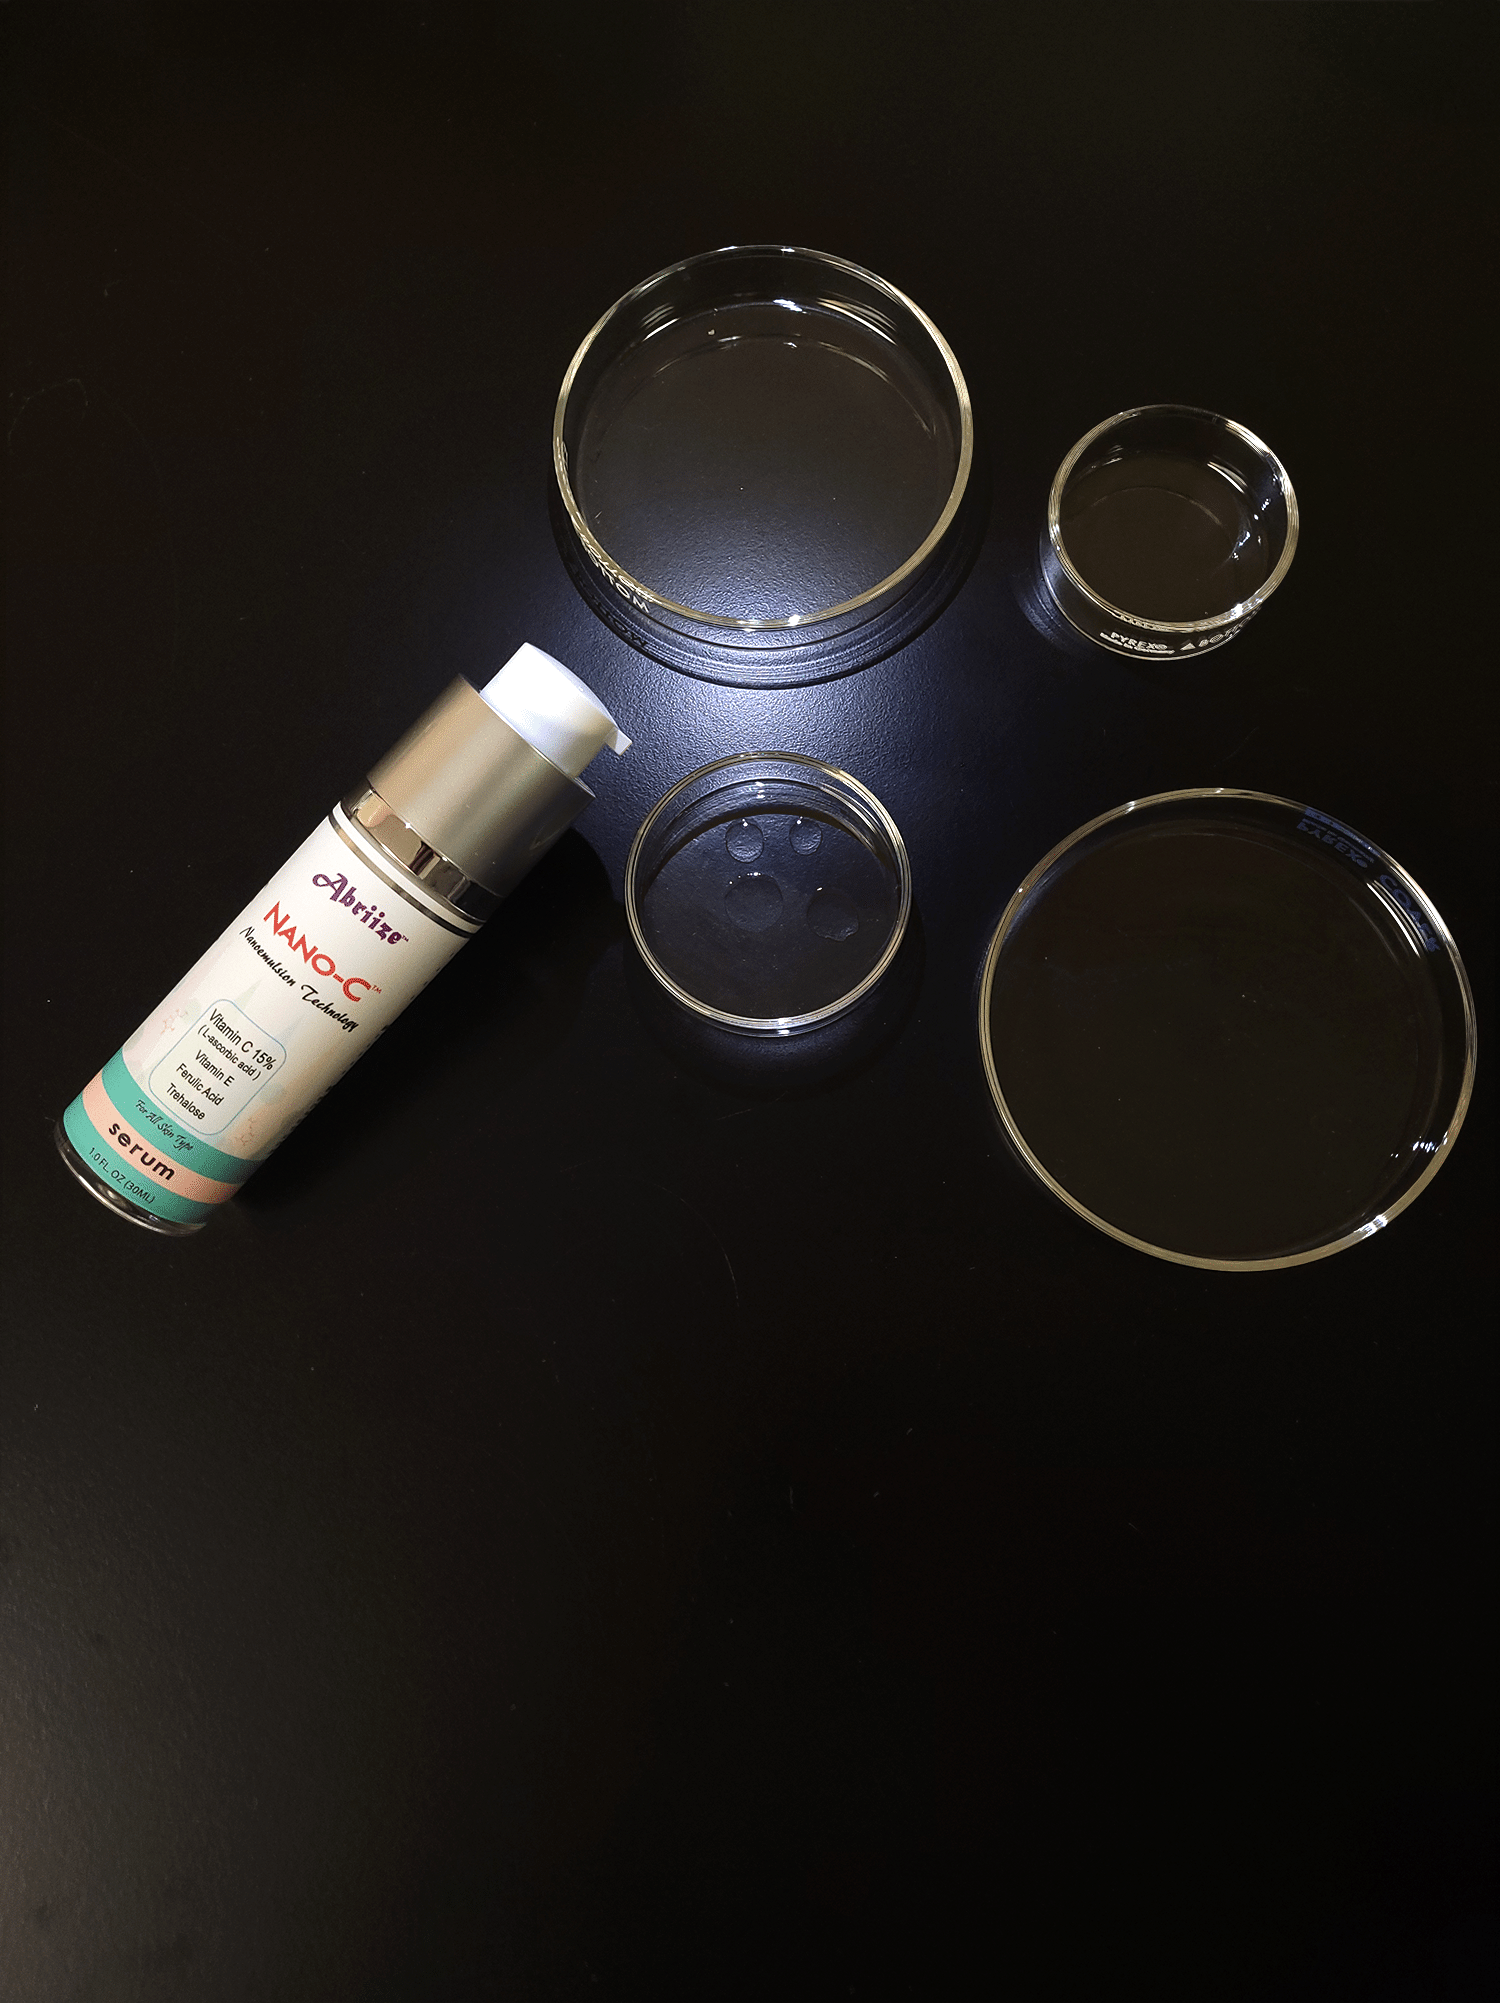 Nano-C vitamin C serum drops onto a glass dish on a black lab counter. There are 4 glass dishes of varying sizes.